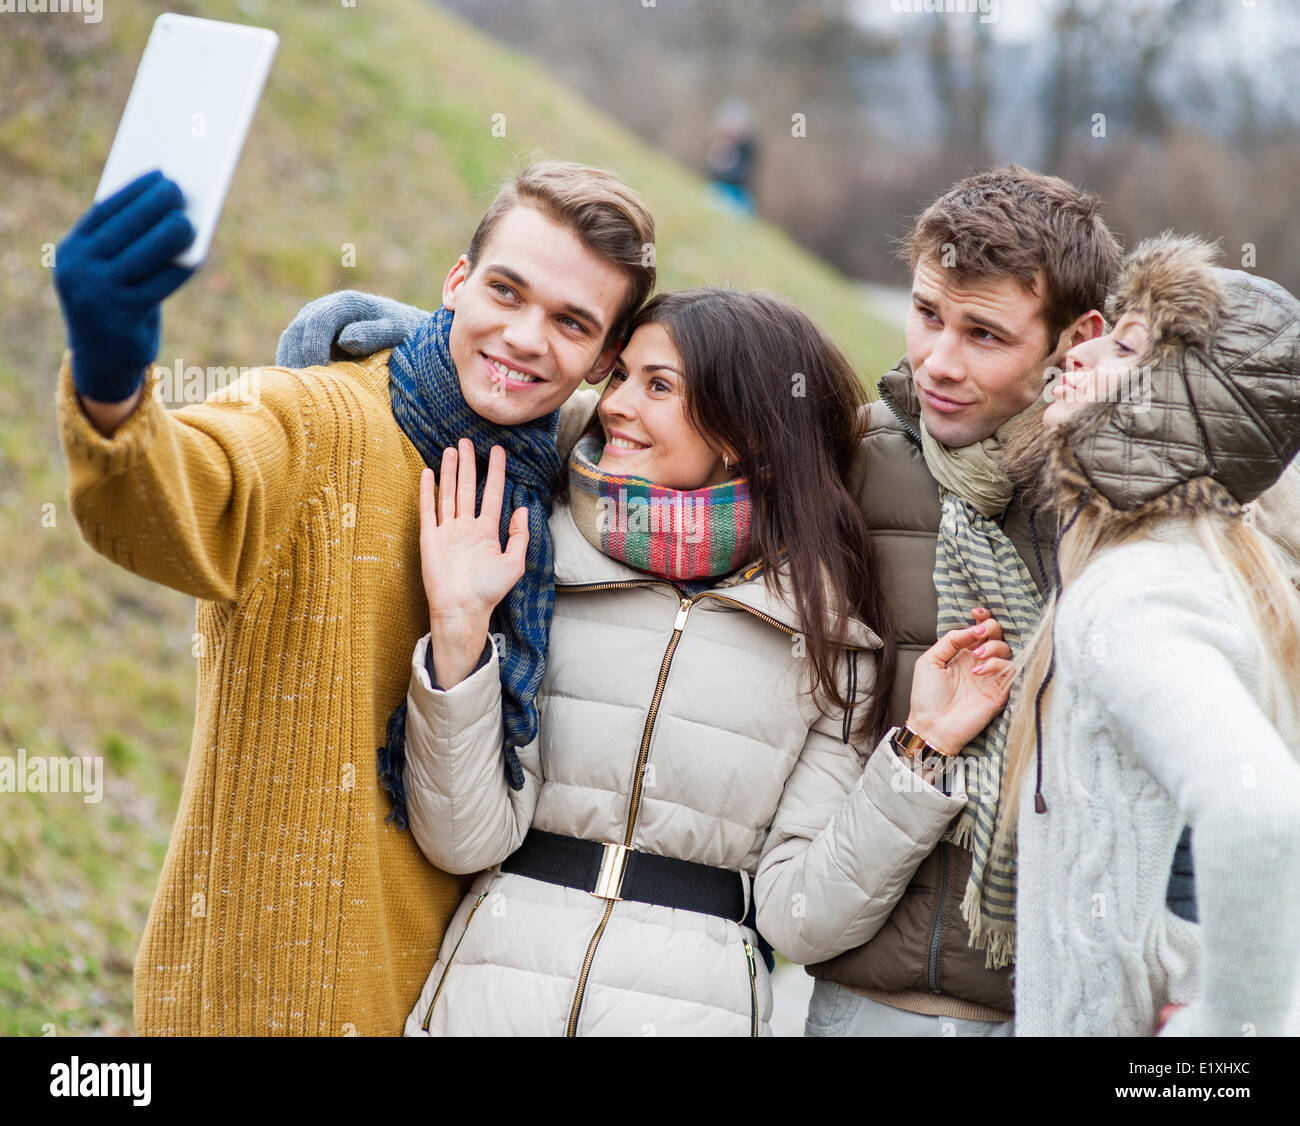 Happy couples taking self portrait through cell phone in park Stock Photo